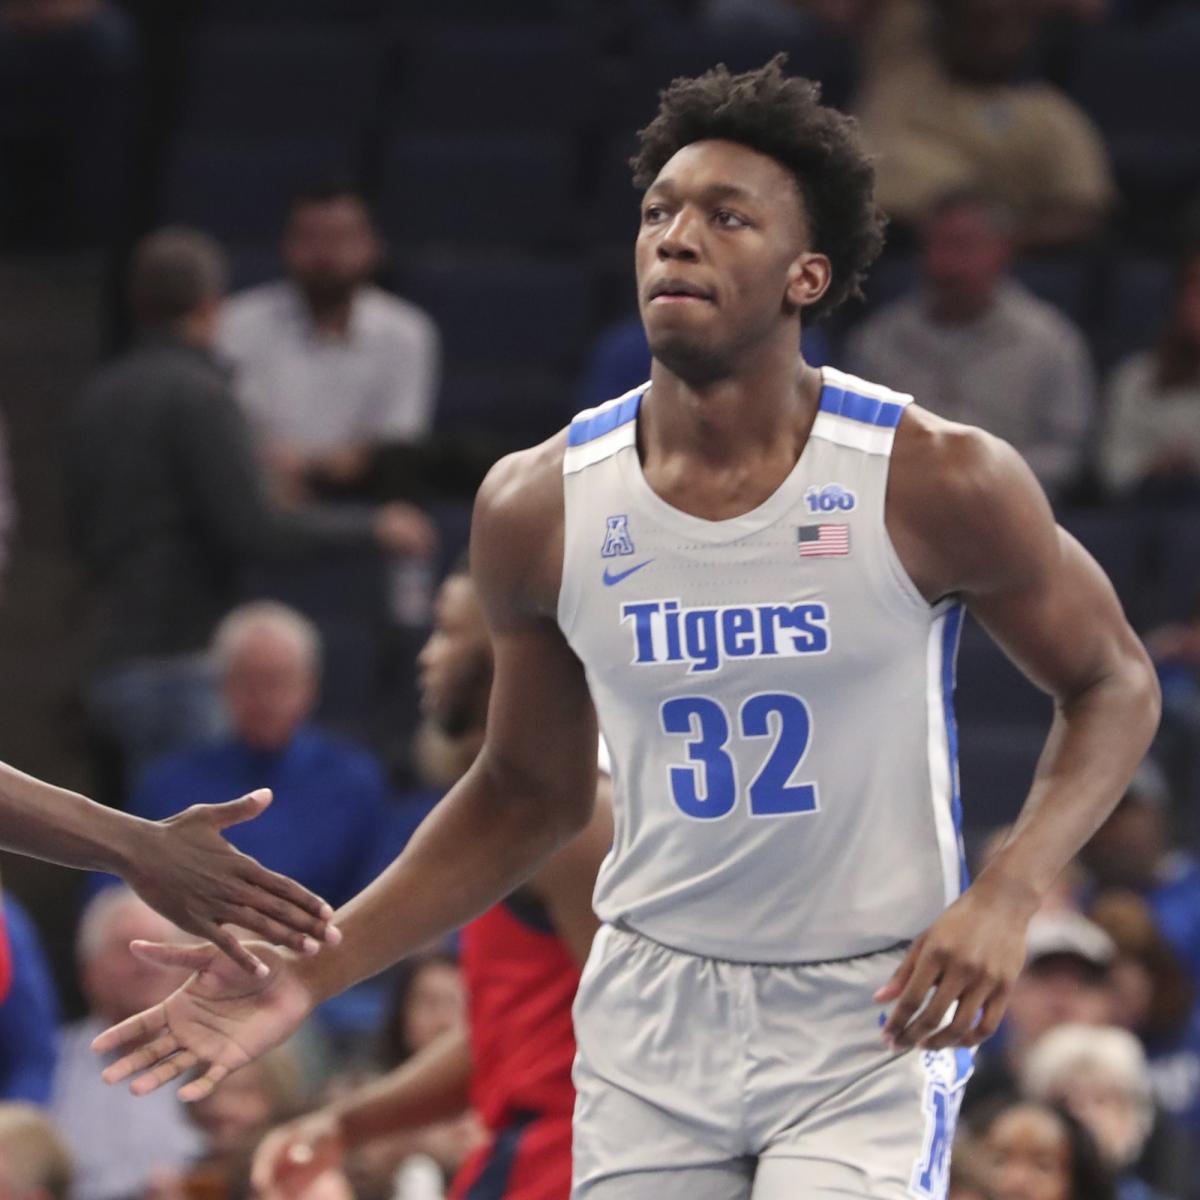 54 HQ Pictures Nba Draft 2020 Prospects - NBA Draft 2020: Latest Expert Mocks and Predictions for ...